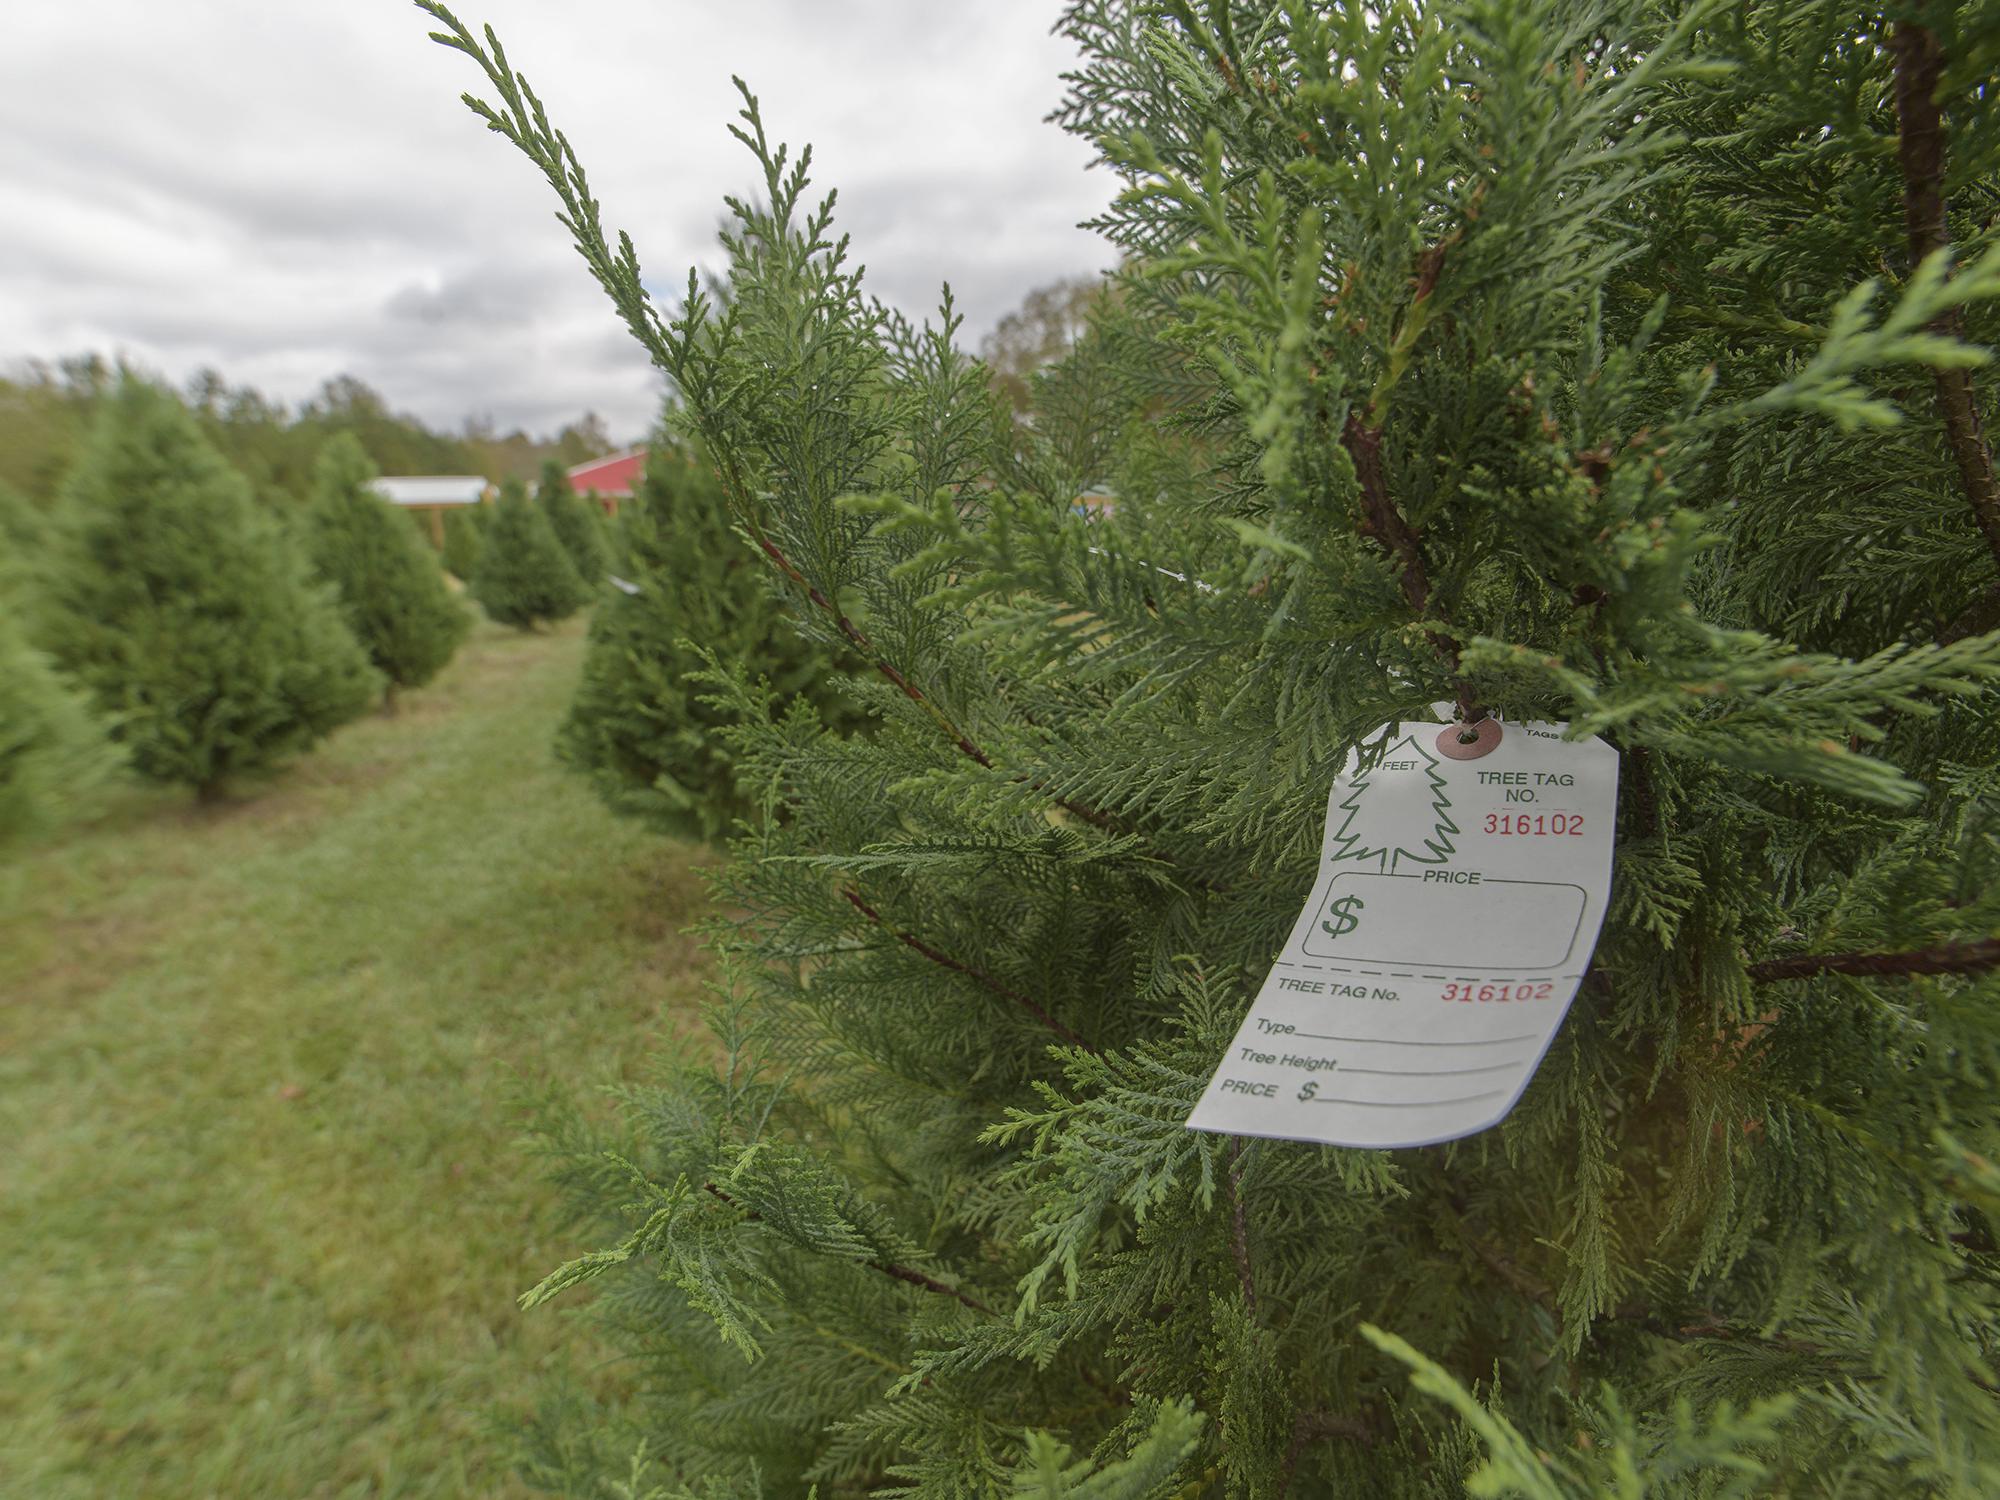 Rows of live green Christmas trees on the left and tree with a pre-printed tag close-up on the right.